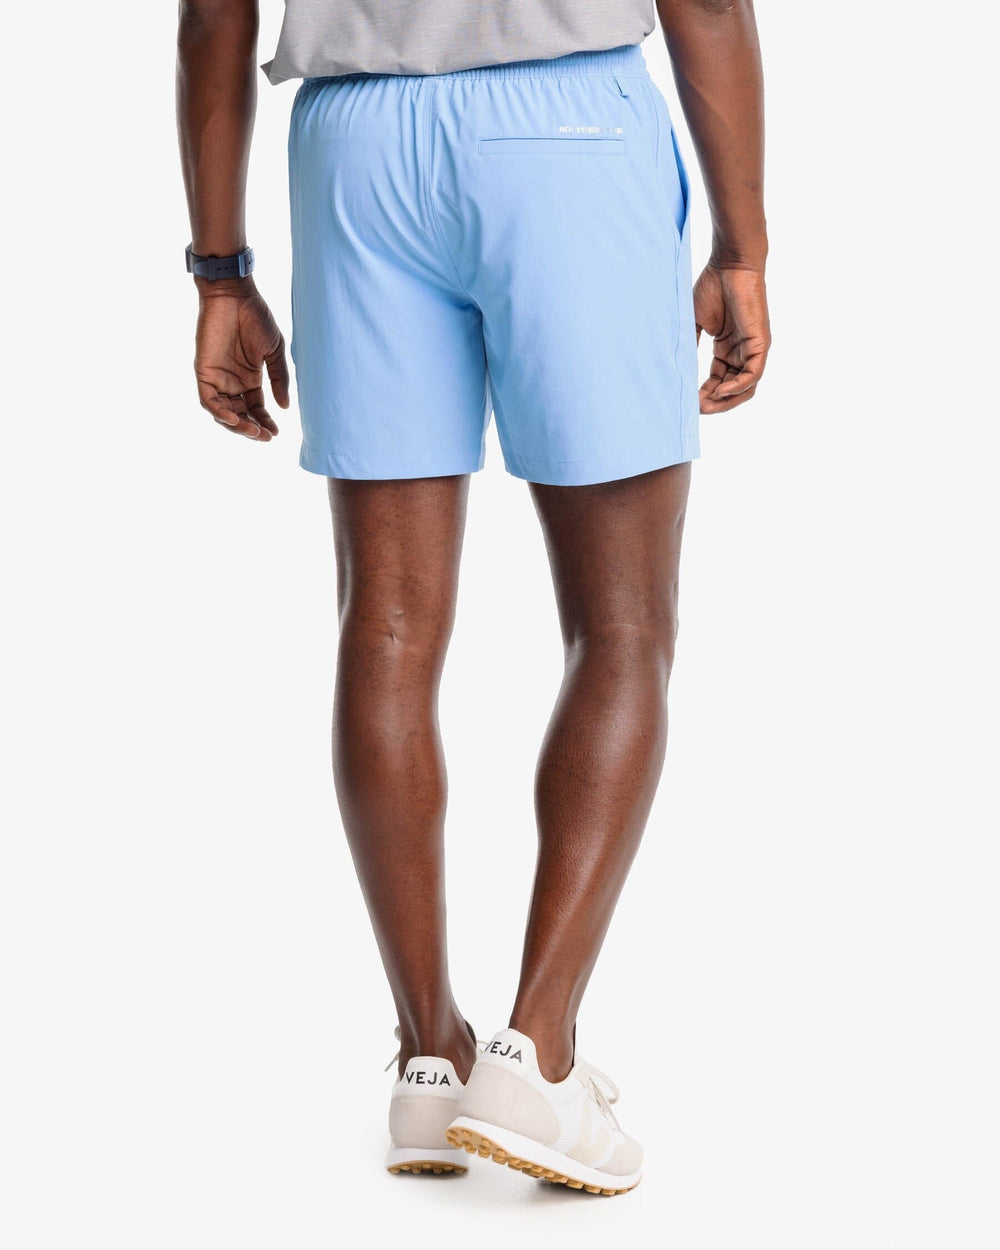 The model back view of the Men's Rip Channel 6 Inch Performance Short by Southern Tide - Boat Blue